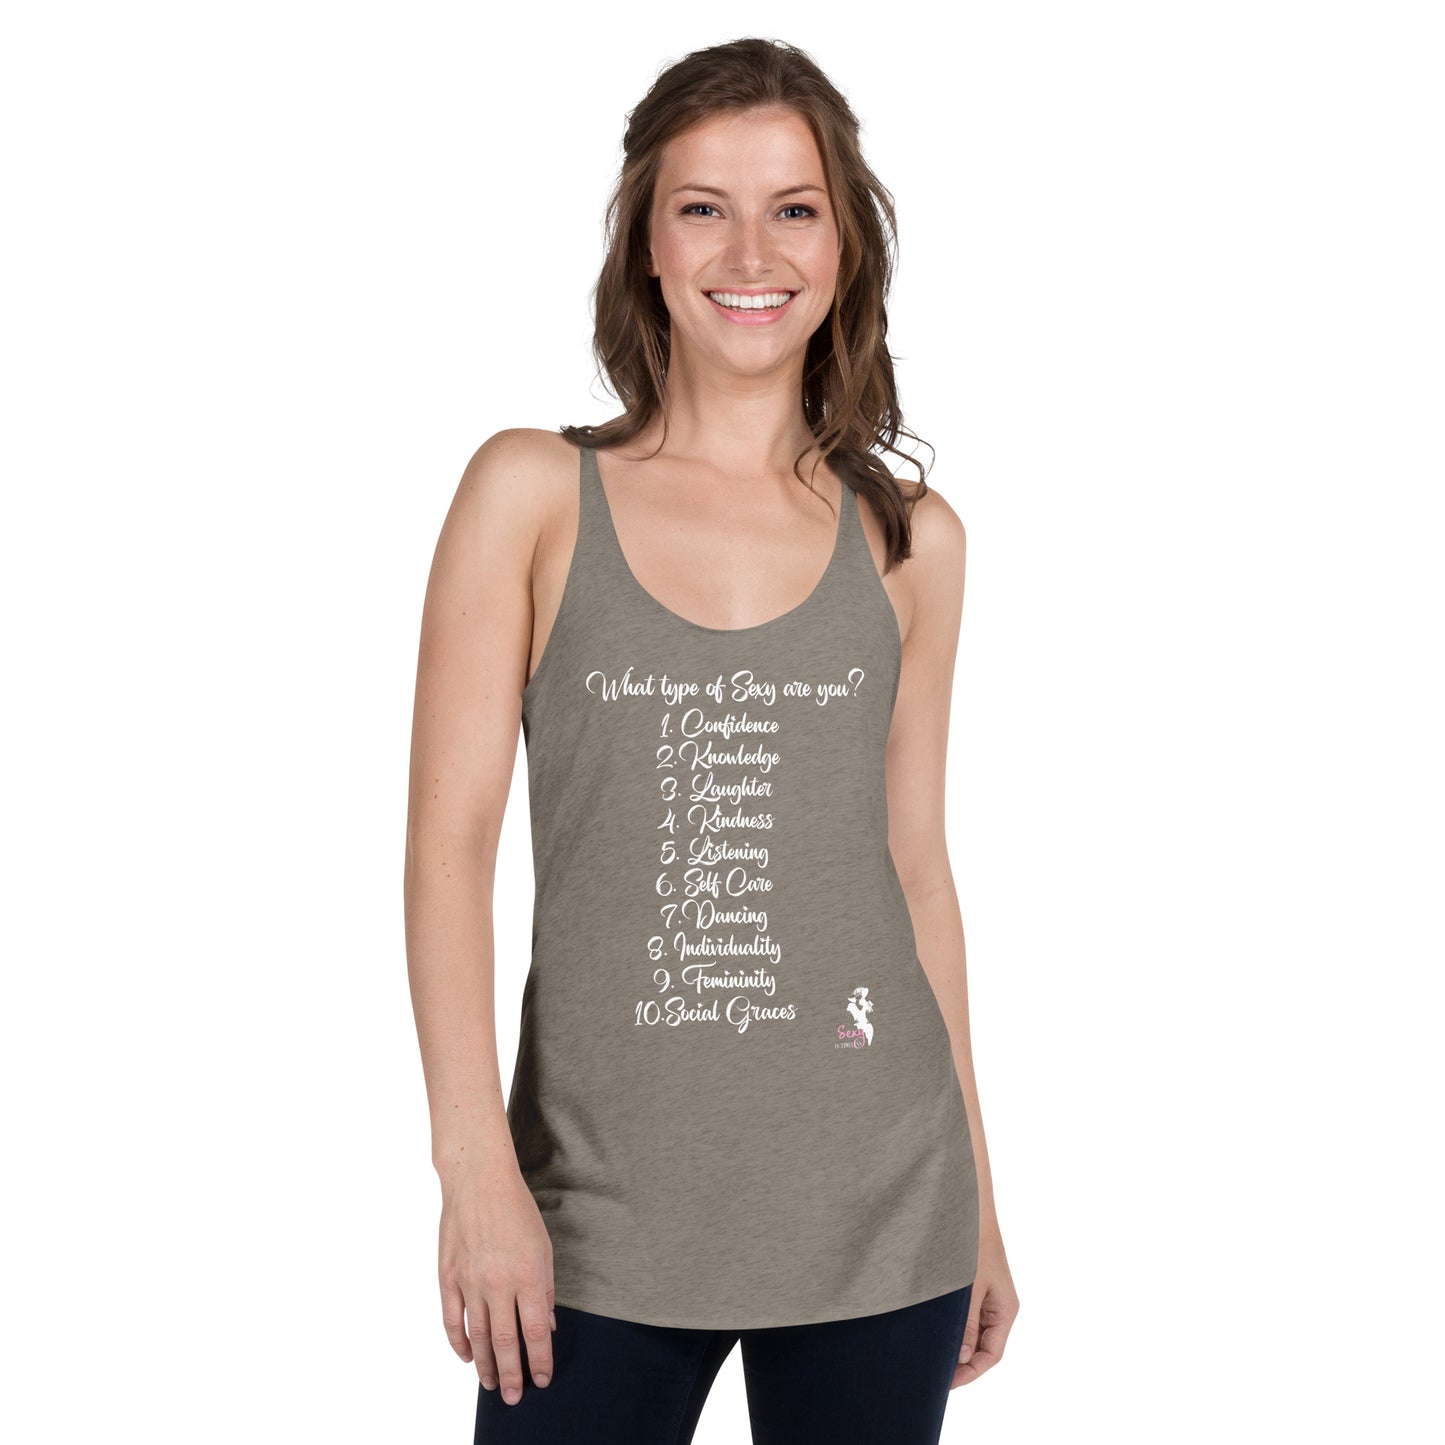 Women's Racerback Tank - What type of sexy are you? - Colors